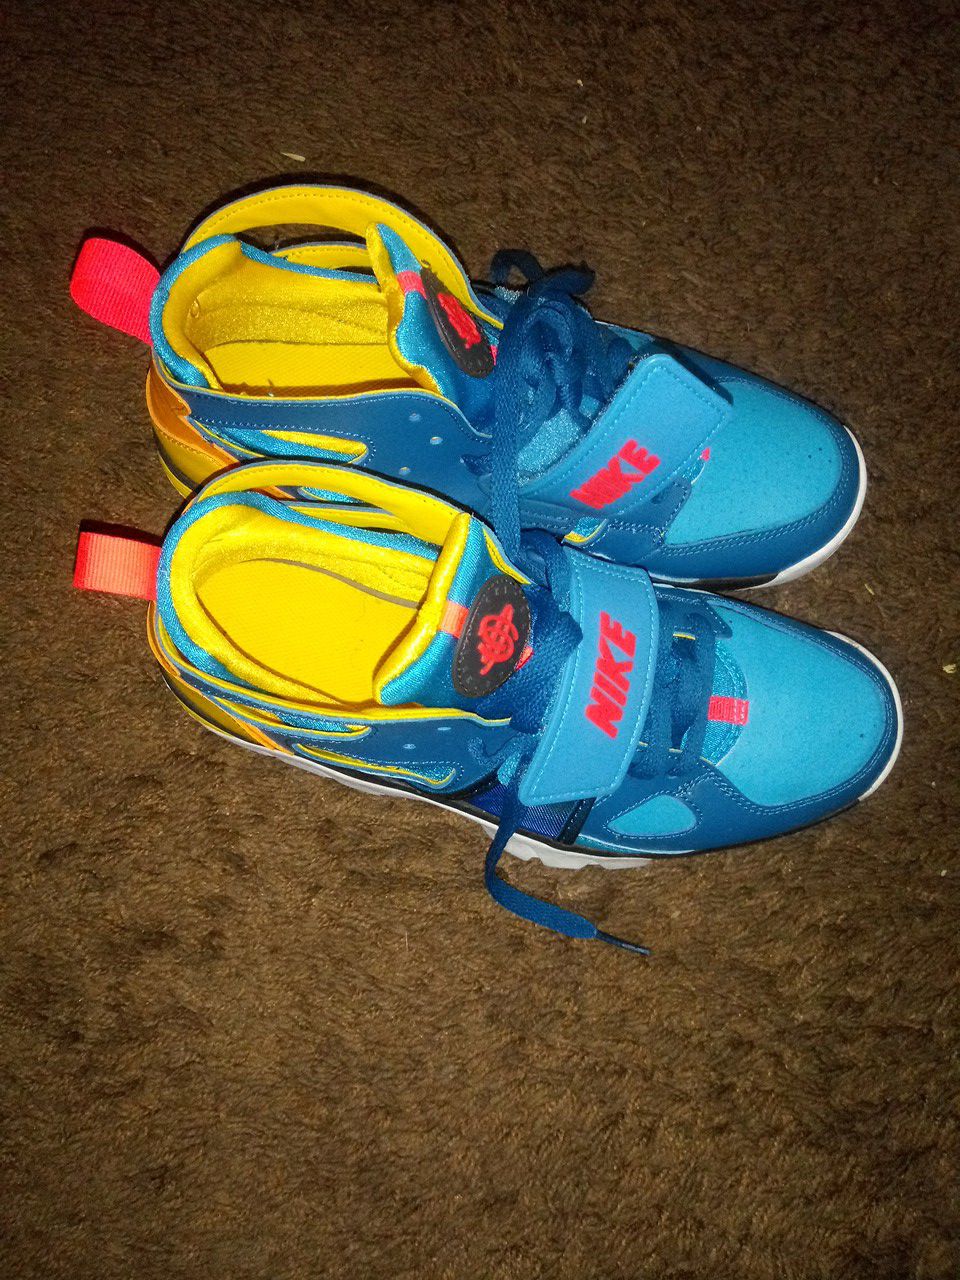 Nike Huaraches for sale 50 or best offer